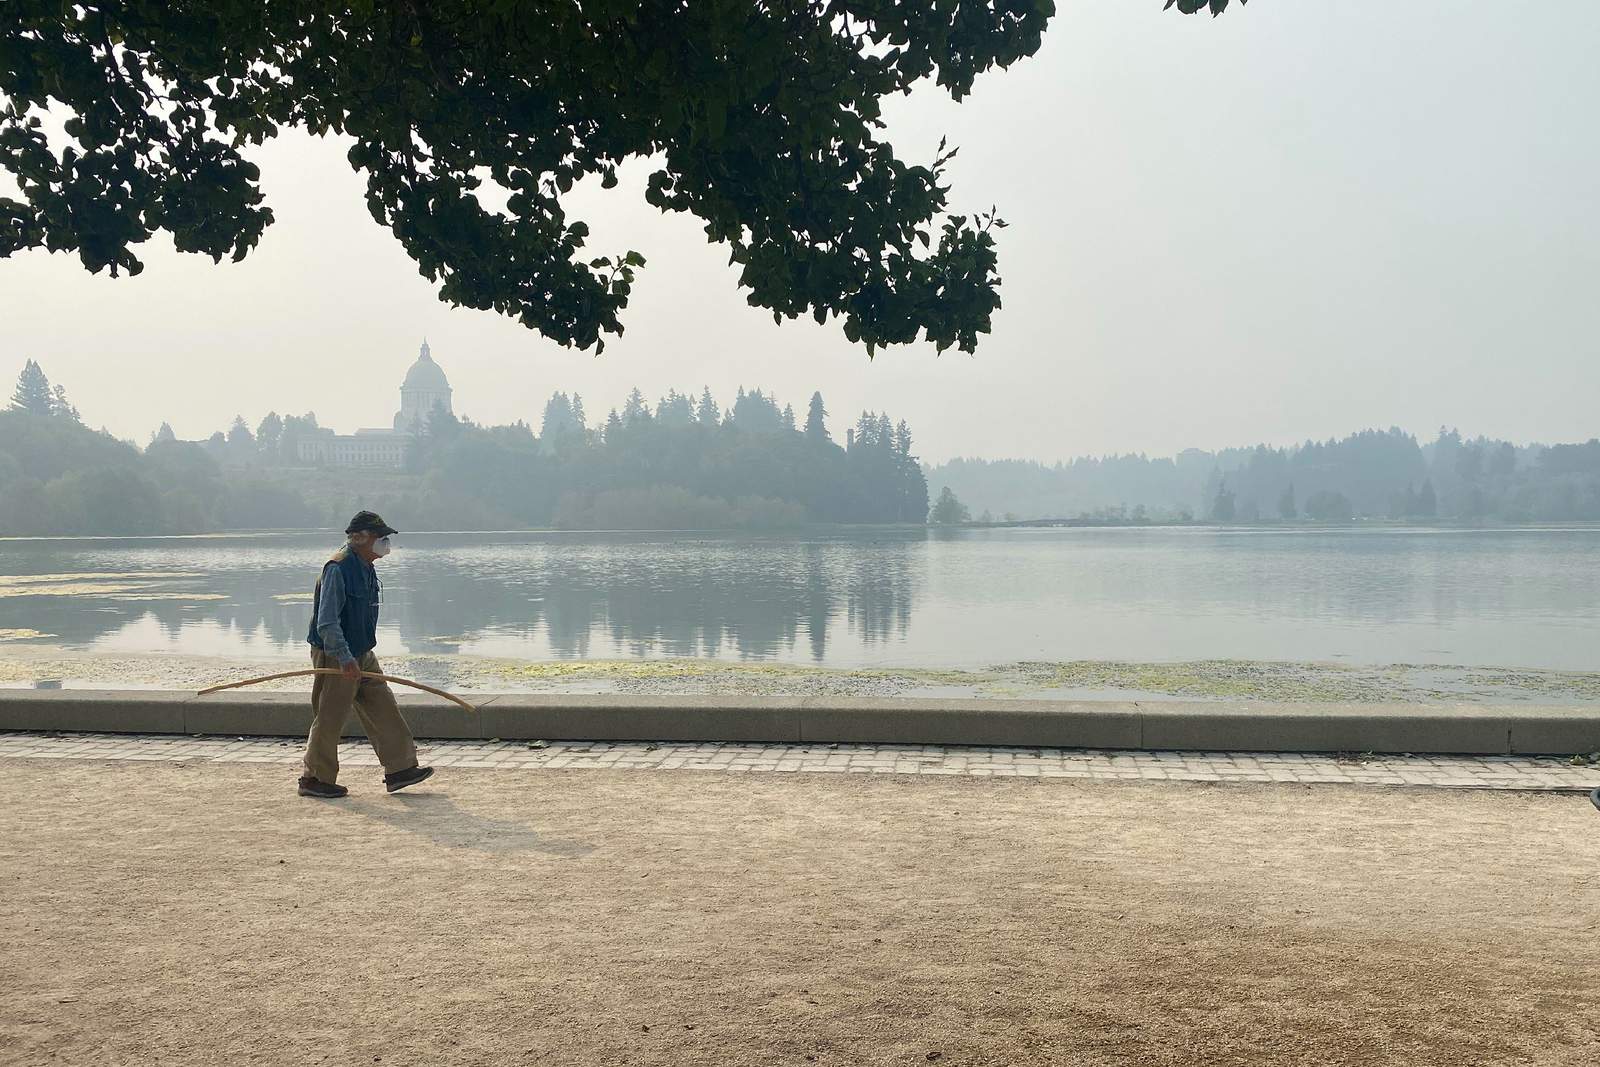 Wildfire smoke brings worst air quality to Portland, Seattle